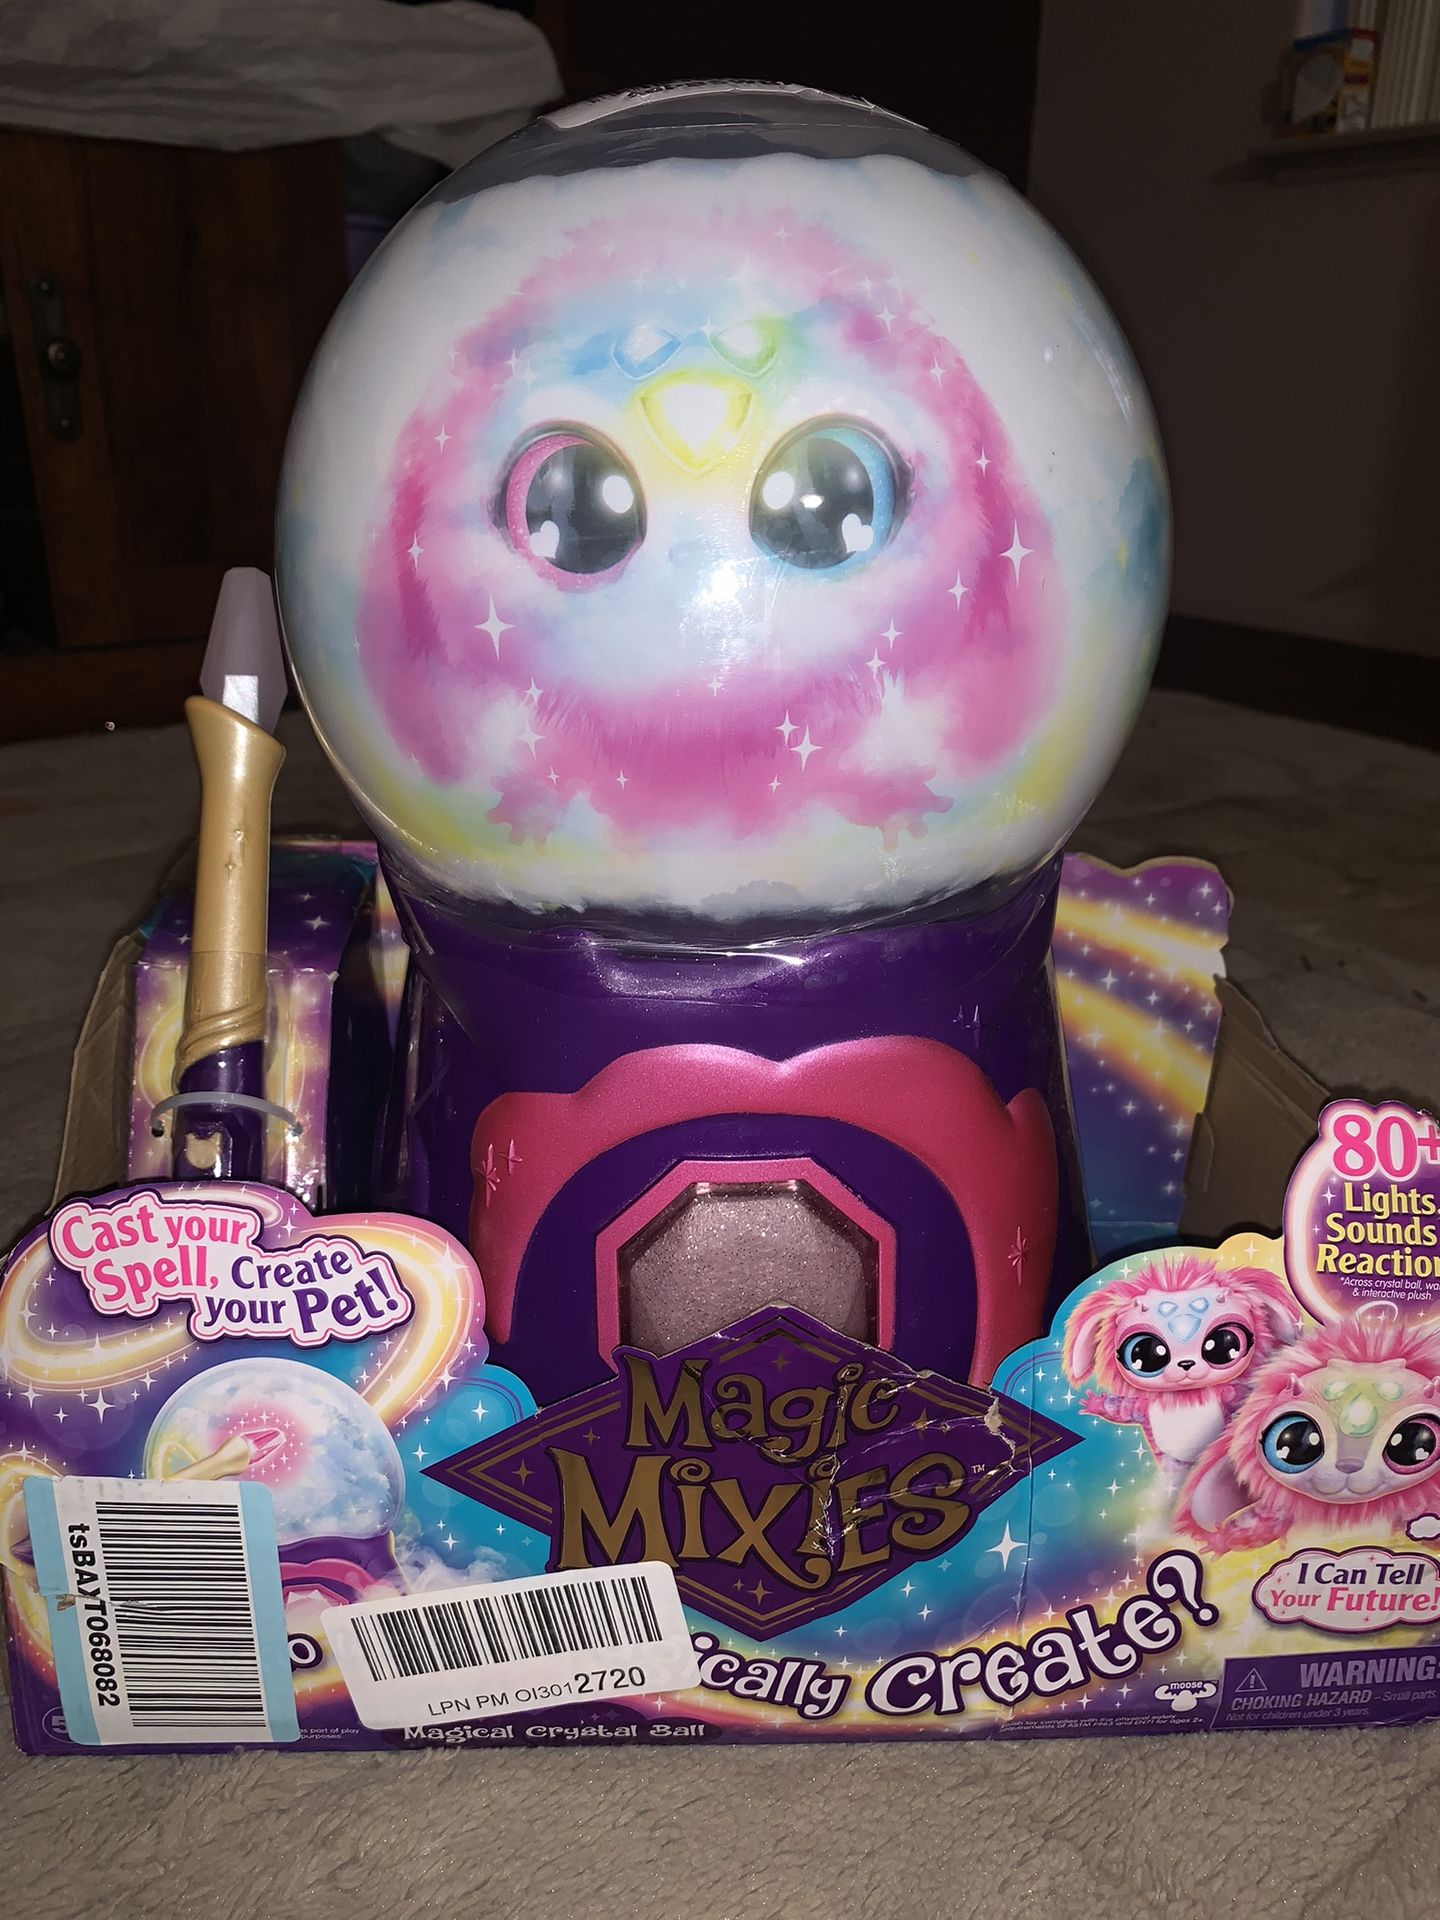  Magic Mixies Magical Misting Crystal Ball with Interactive 8  inch Pink Plush Toy and 80+ Sounds and Reactions : Toys & Games